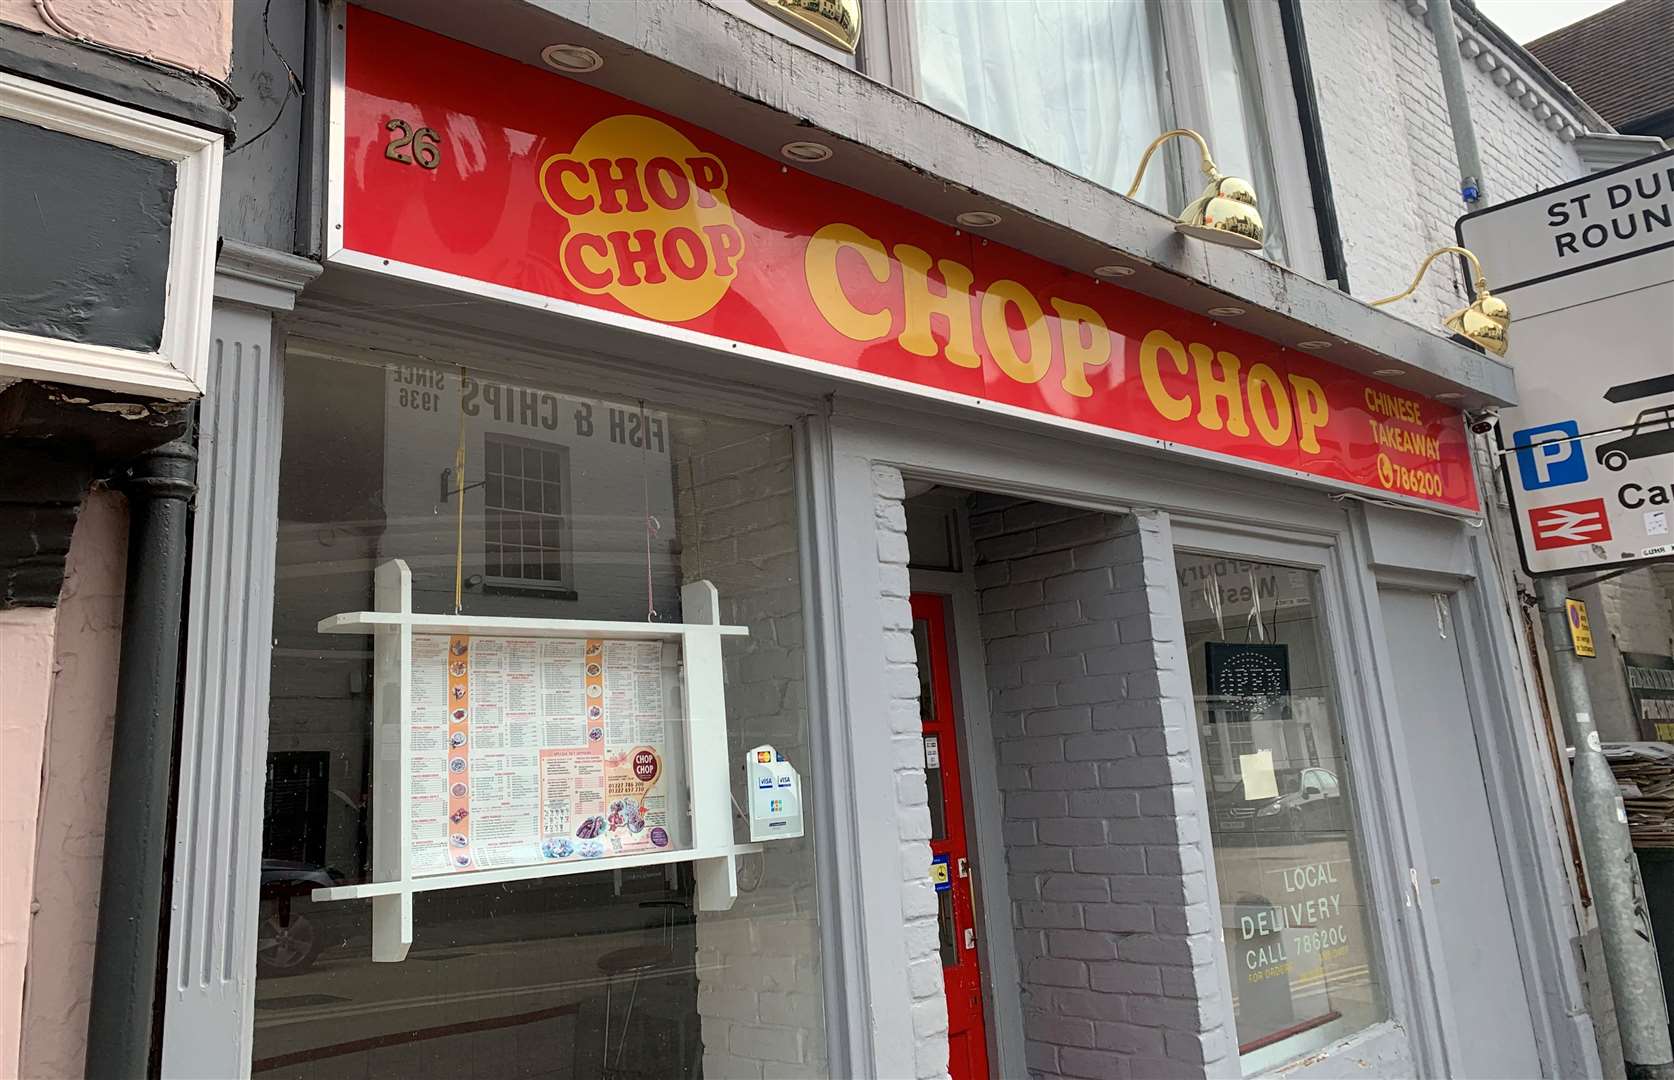 Rotting food was removed from Chop Chop in St Dunstan's Street in Canterbury after complaints about the smell